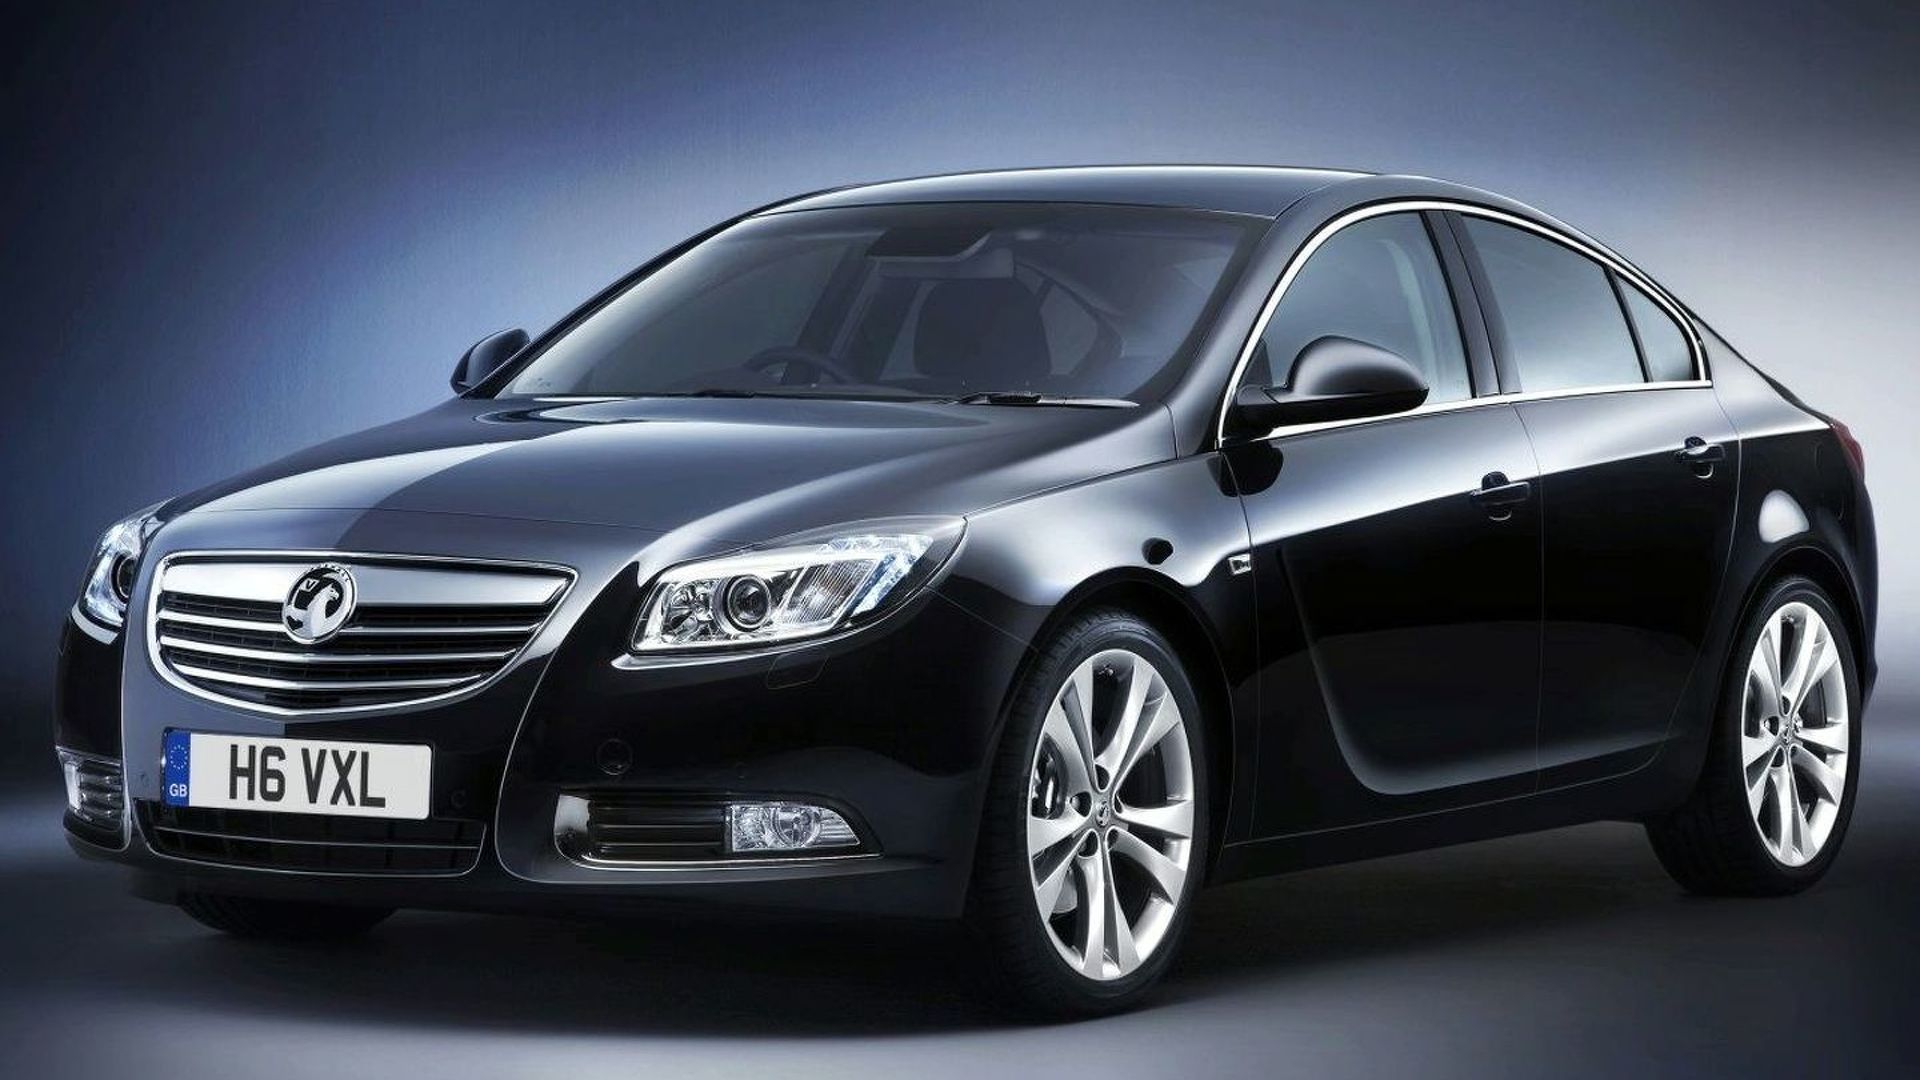 Opel Insignia Wallpapers